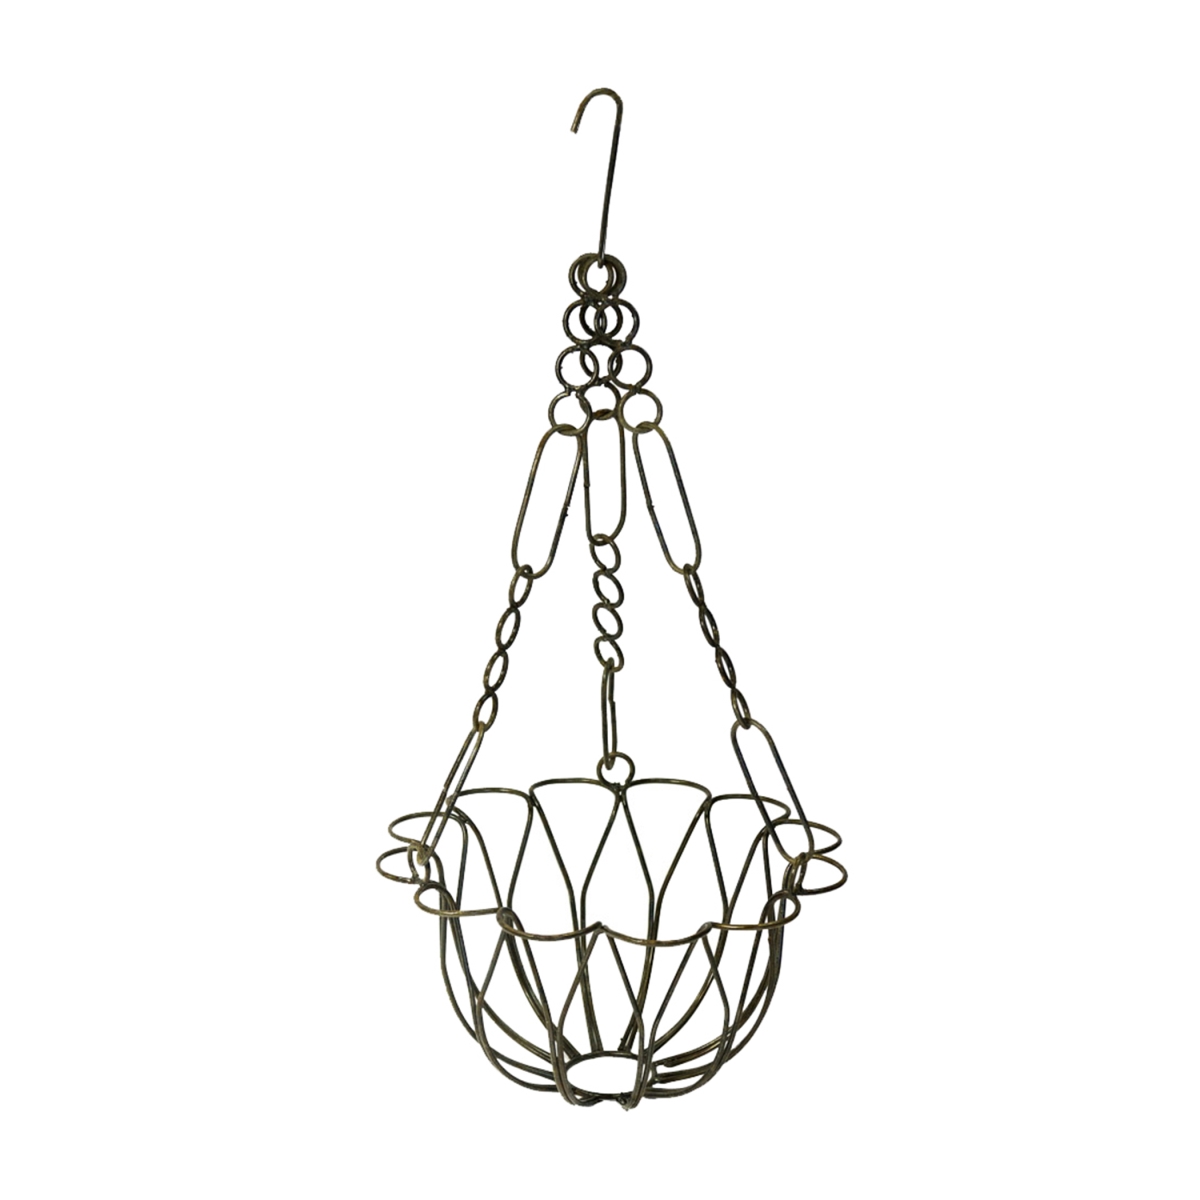 Balcony Beyond Wrought Iron Hanging Chain Planter - Black - 24 inches